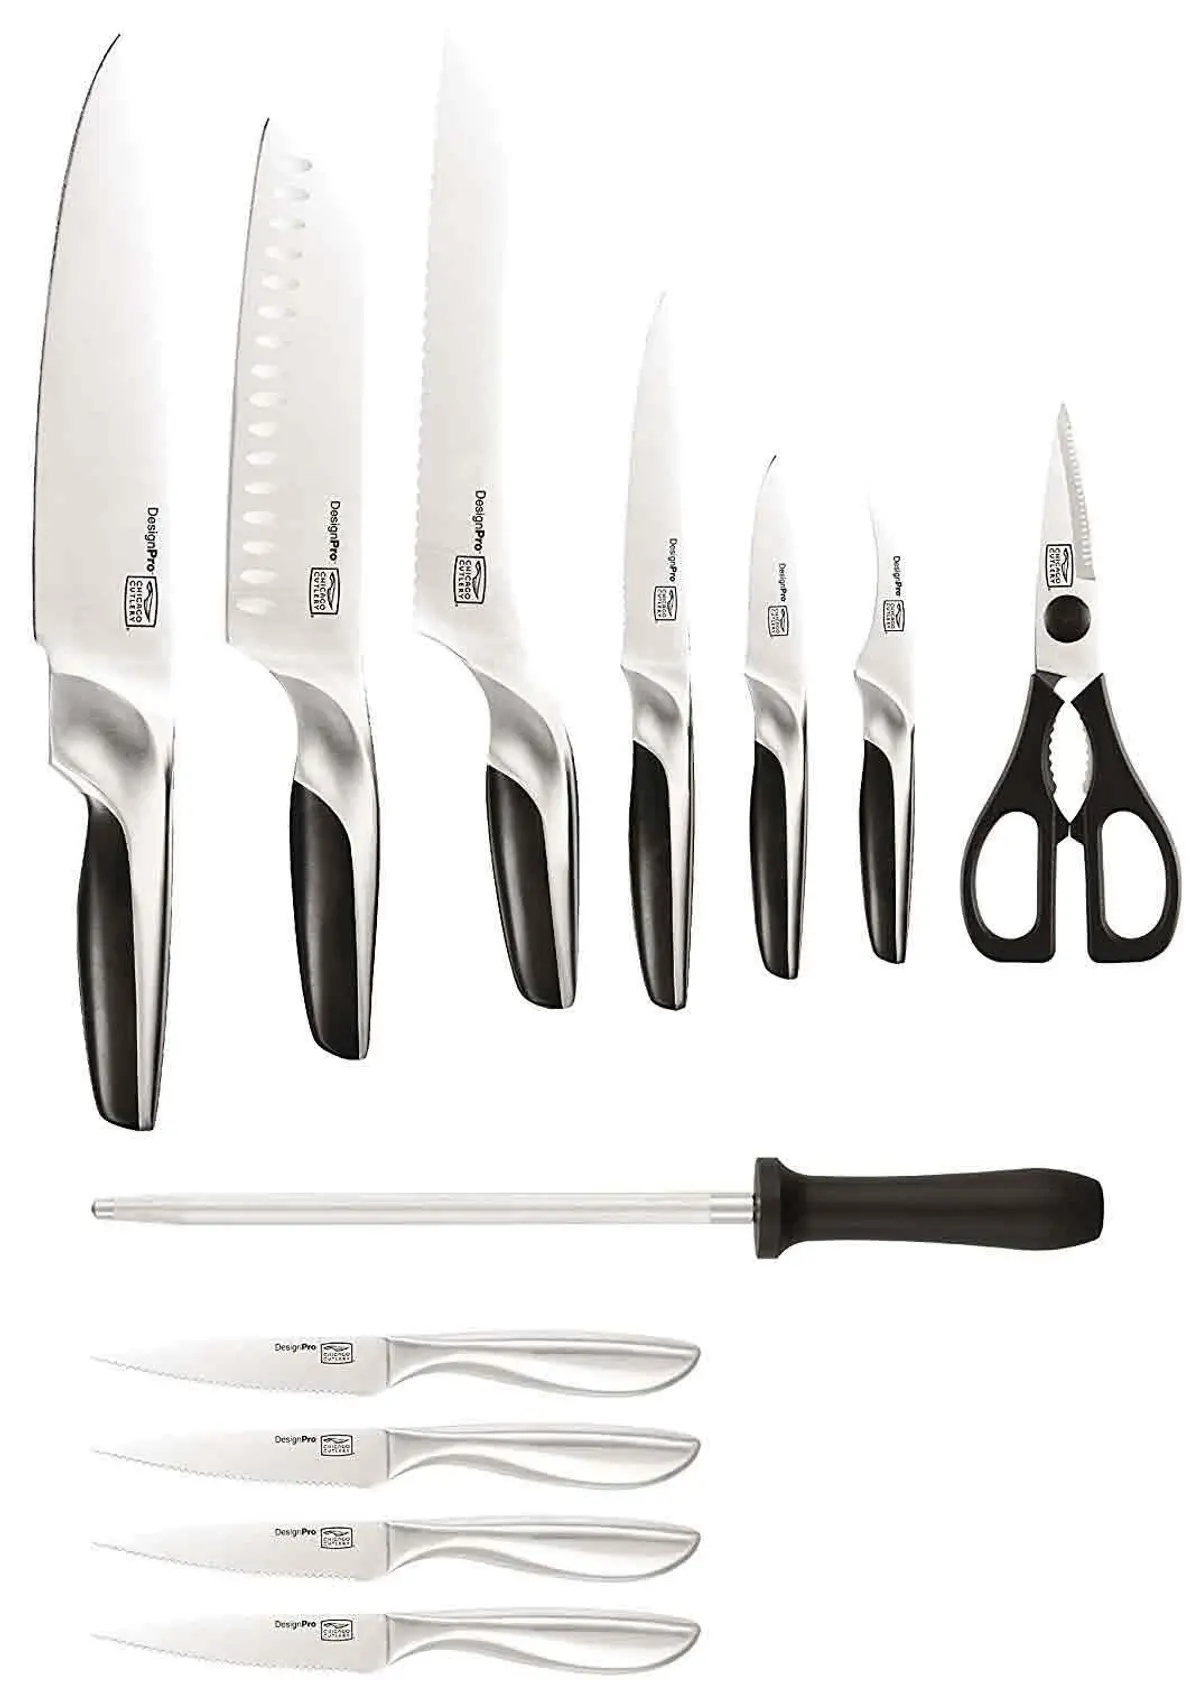 In-the-set-Chicago-Cutlery-13-Piece-Block-Knife-Set